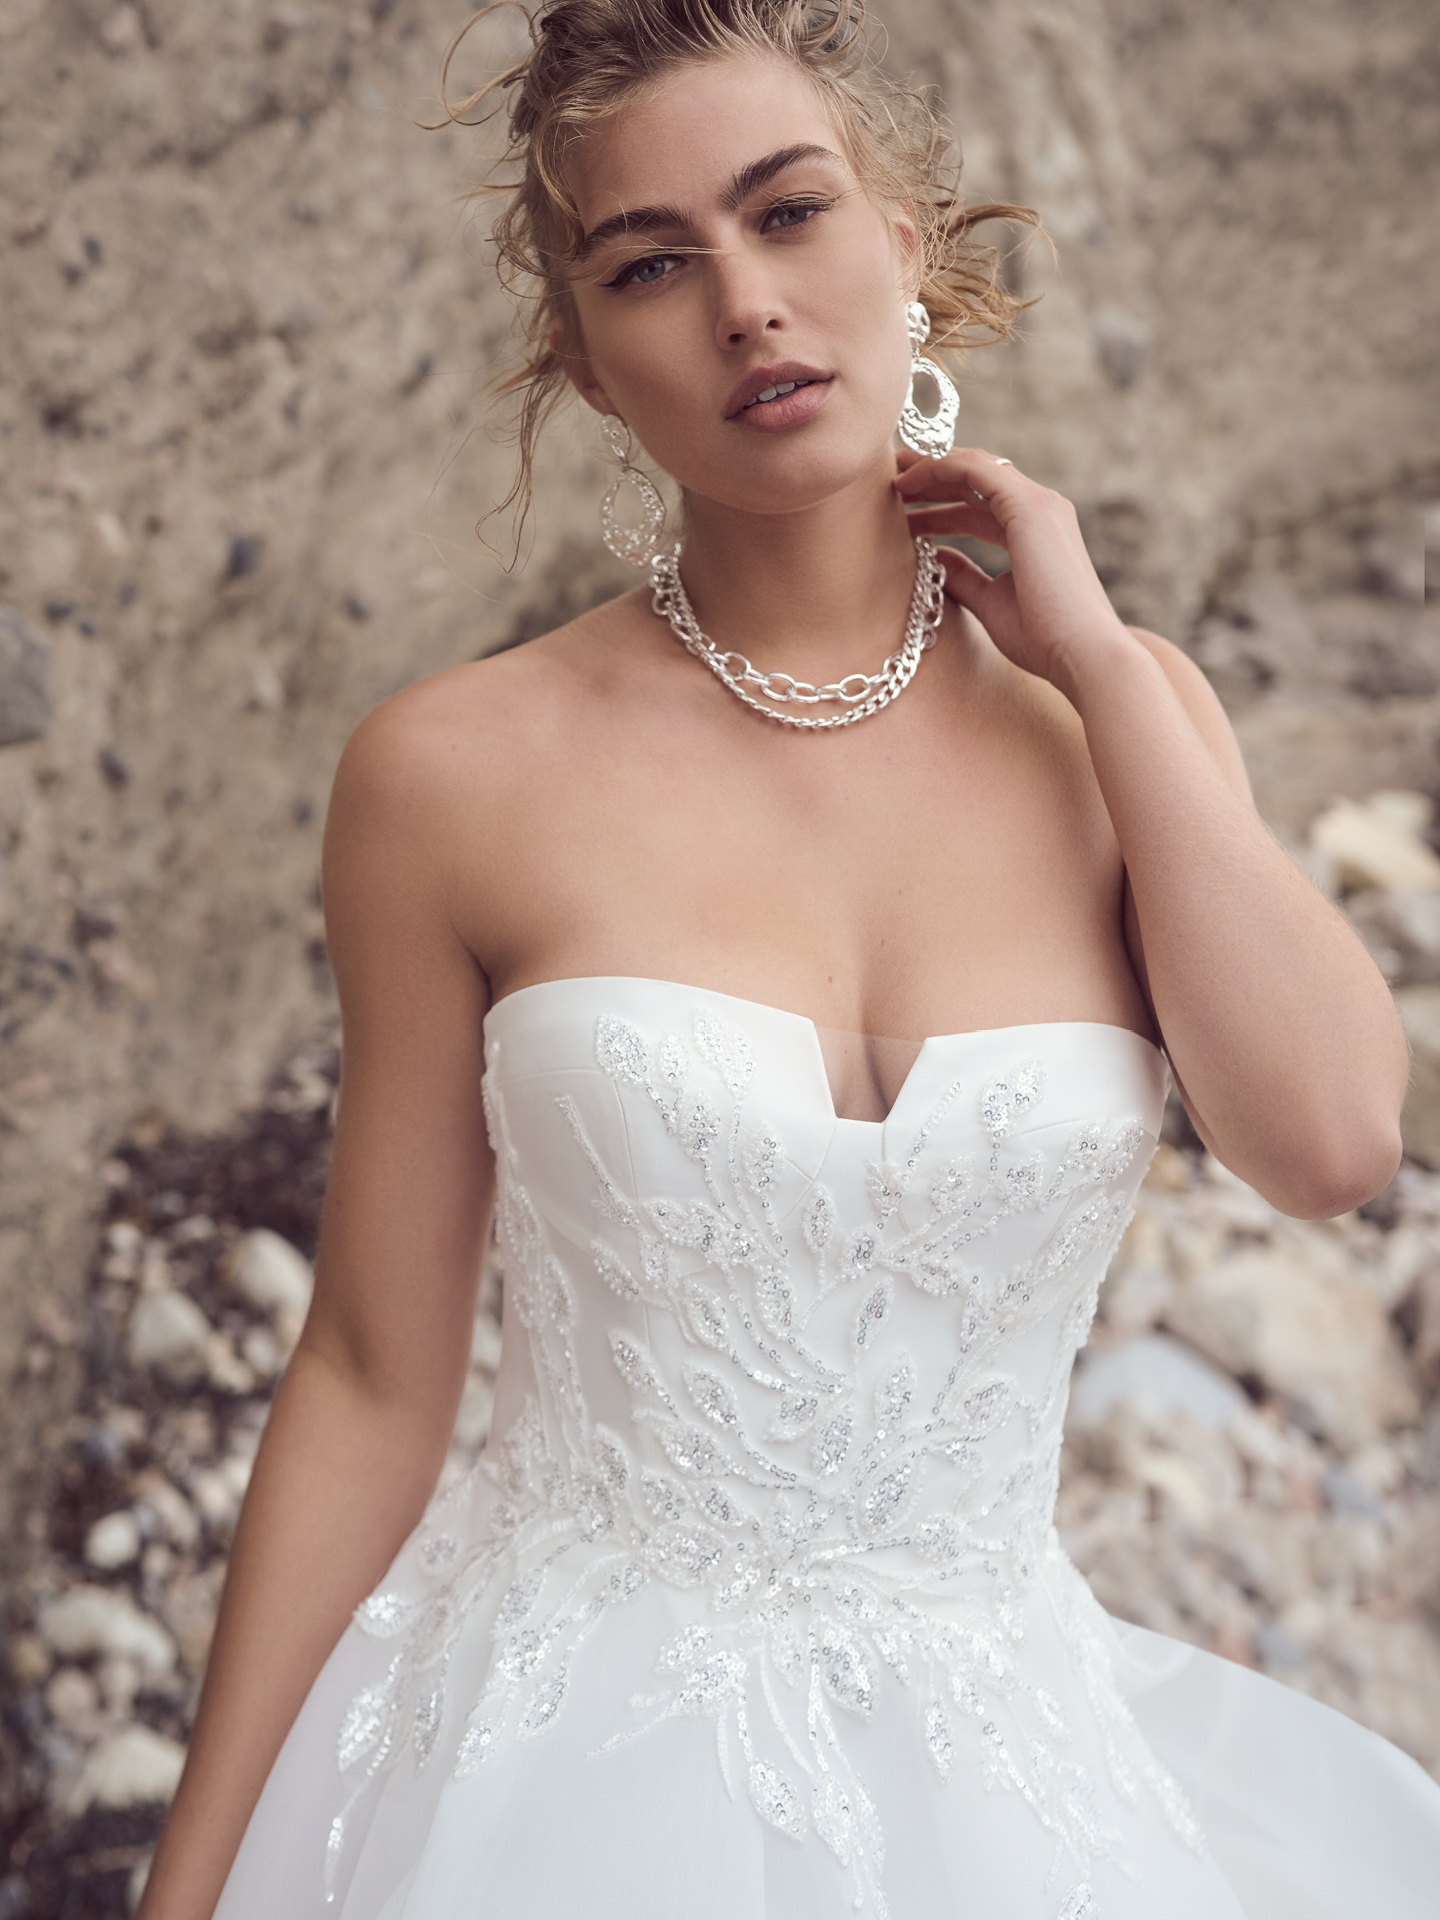 Bride In Square Neck Wedding Dress Called Italiana By Sottero And Midgley